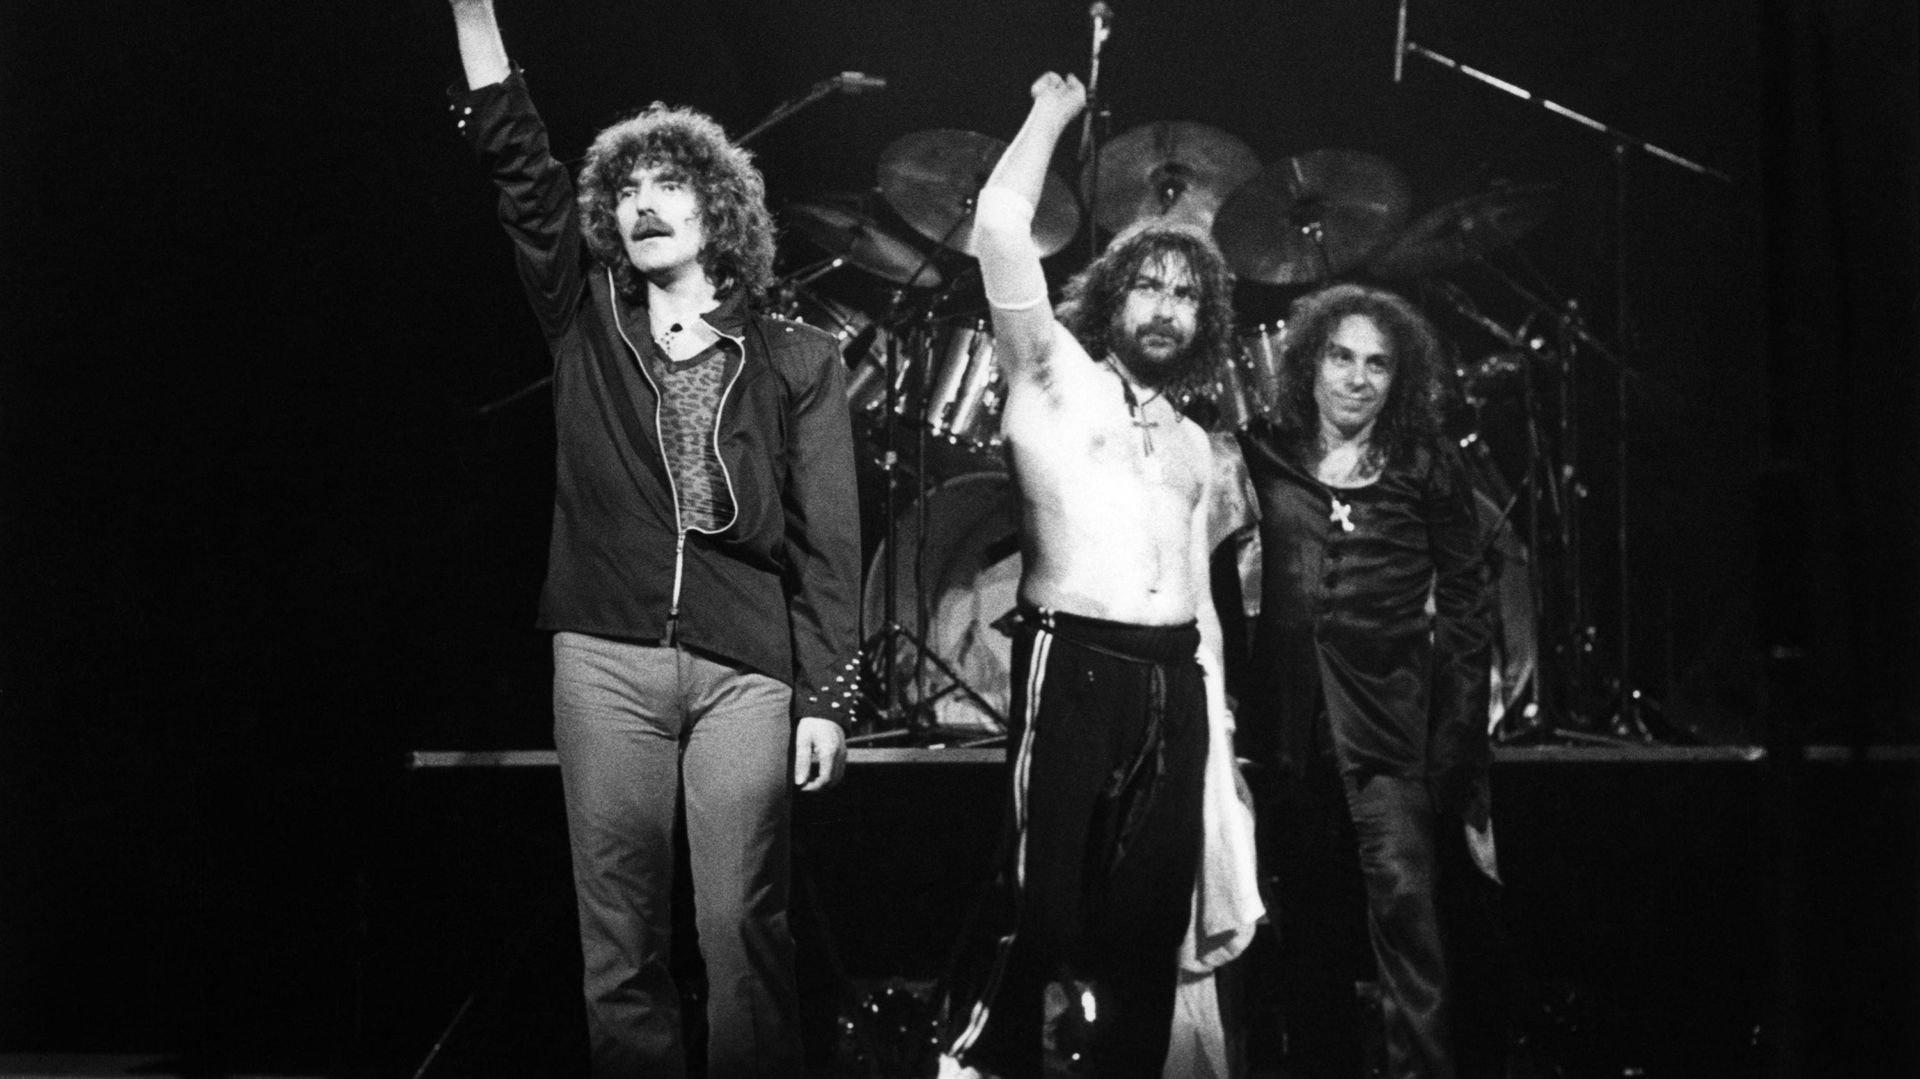 Photo of Bill WARD and Geezer BUTLER and Ronnie DIO and BLACK SABBATH